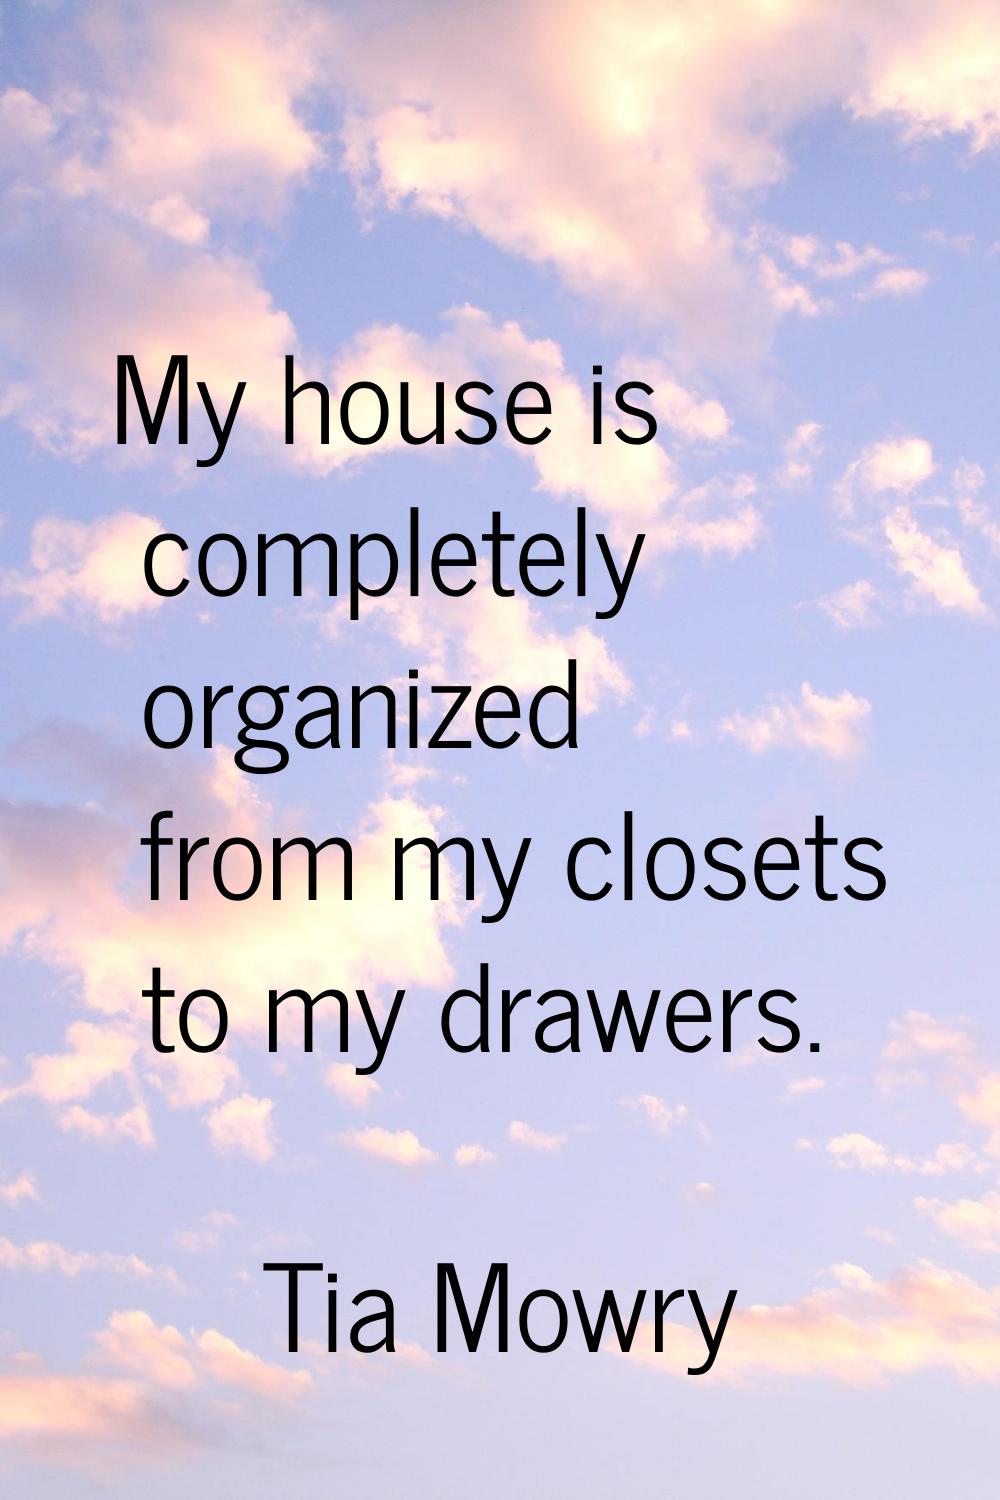 My house is completely organized from my closets to my drawers.